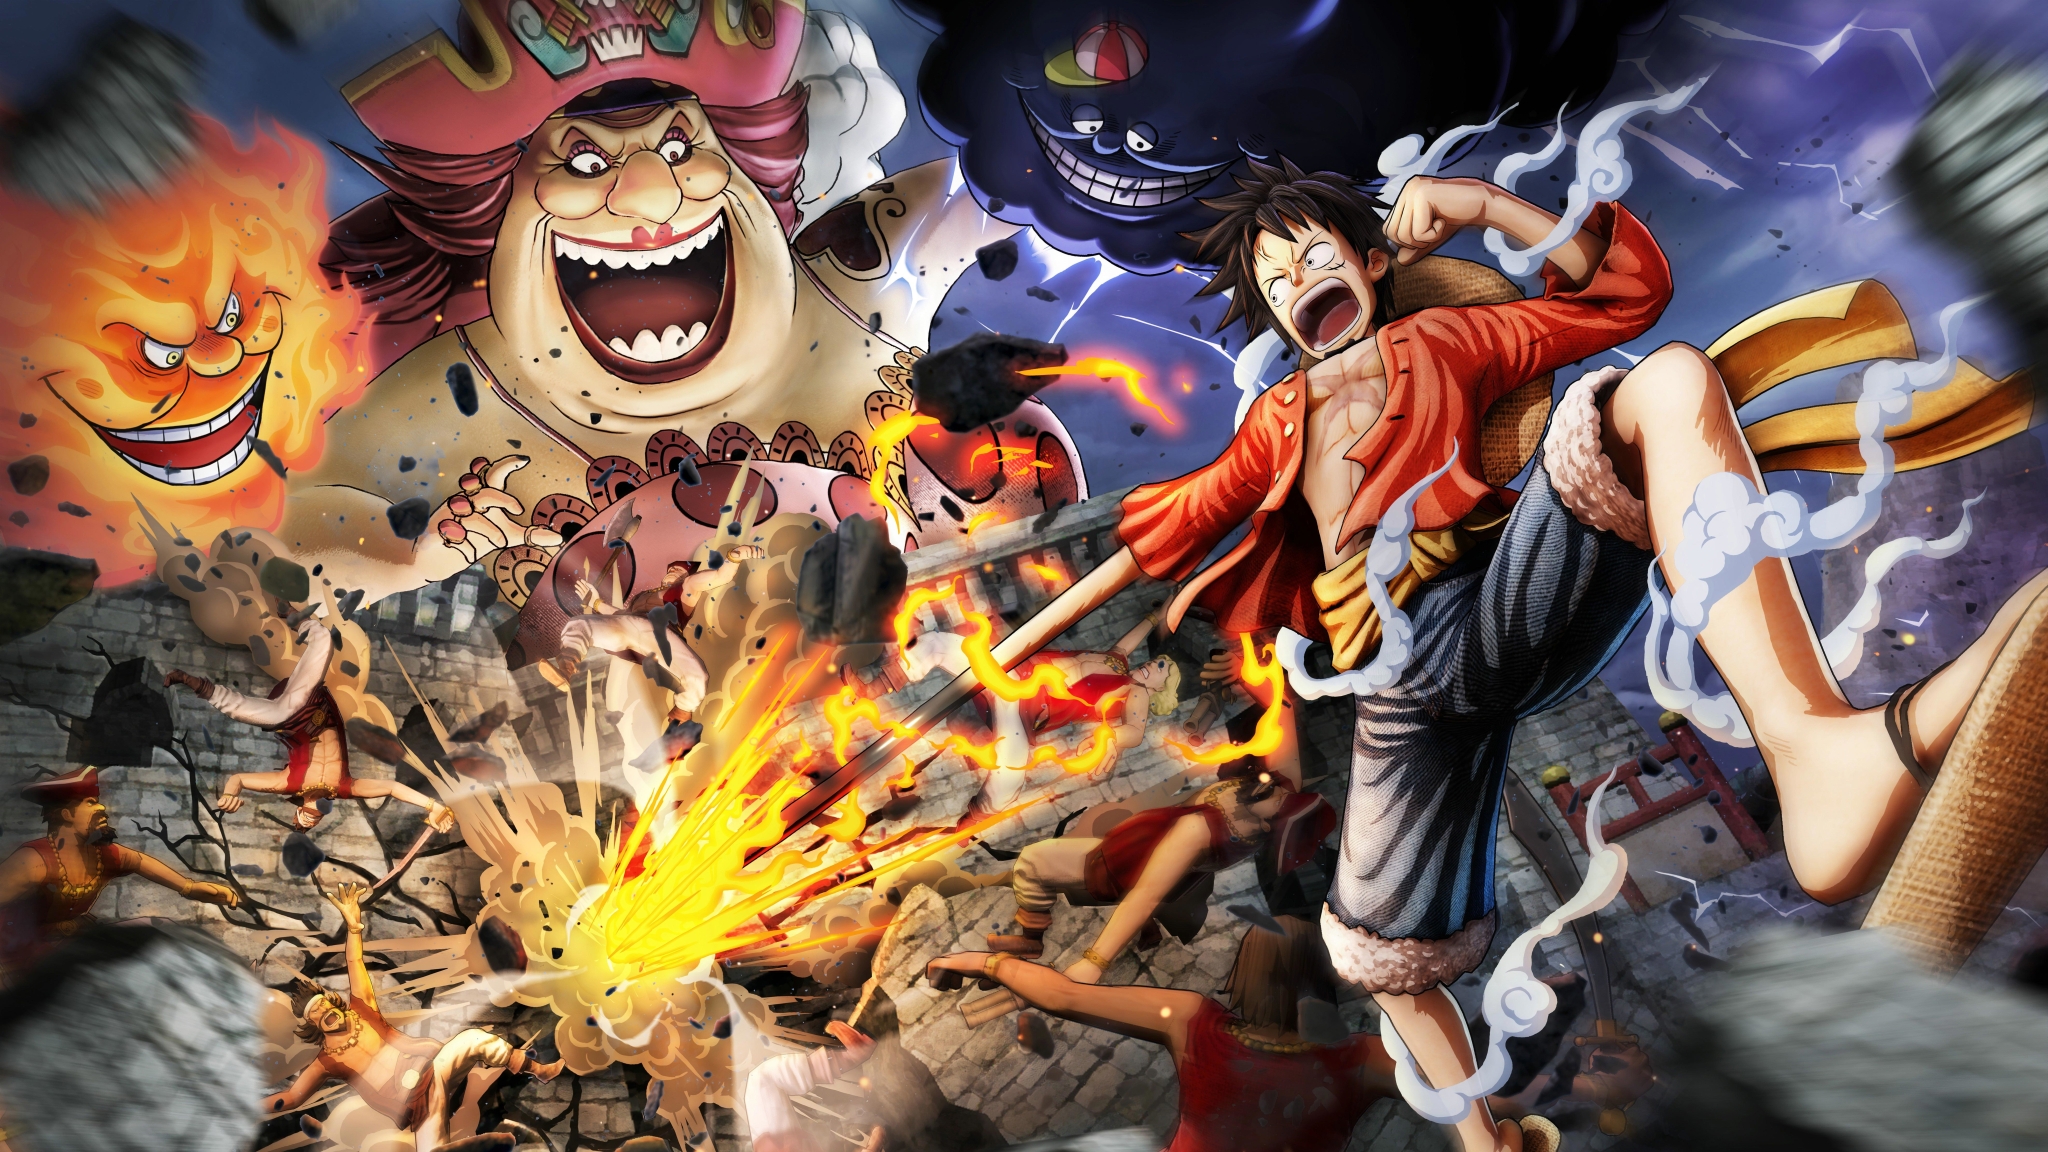 48x1152 One Piece Pirate Warriors 48x1152 Resolution Wallpaper Hd Games 4k Wallpapers Images Photos And Background Wallpapers Den